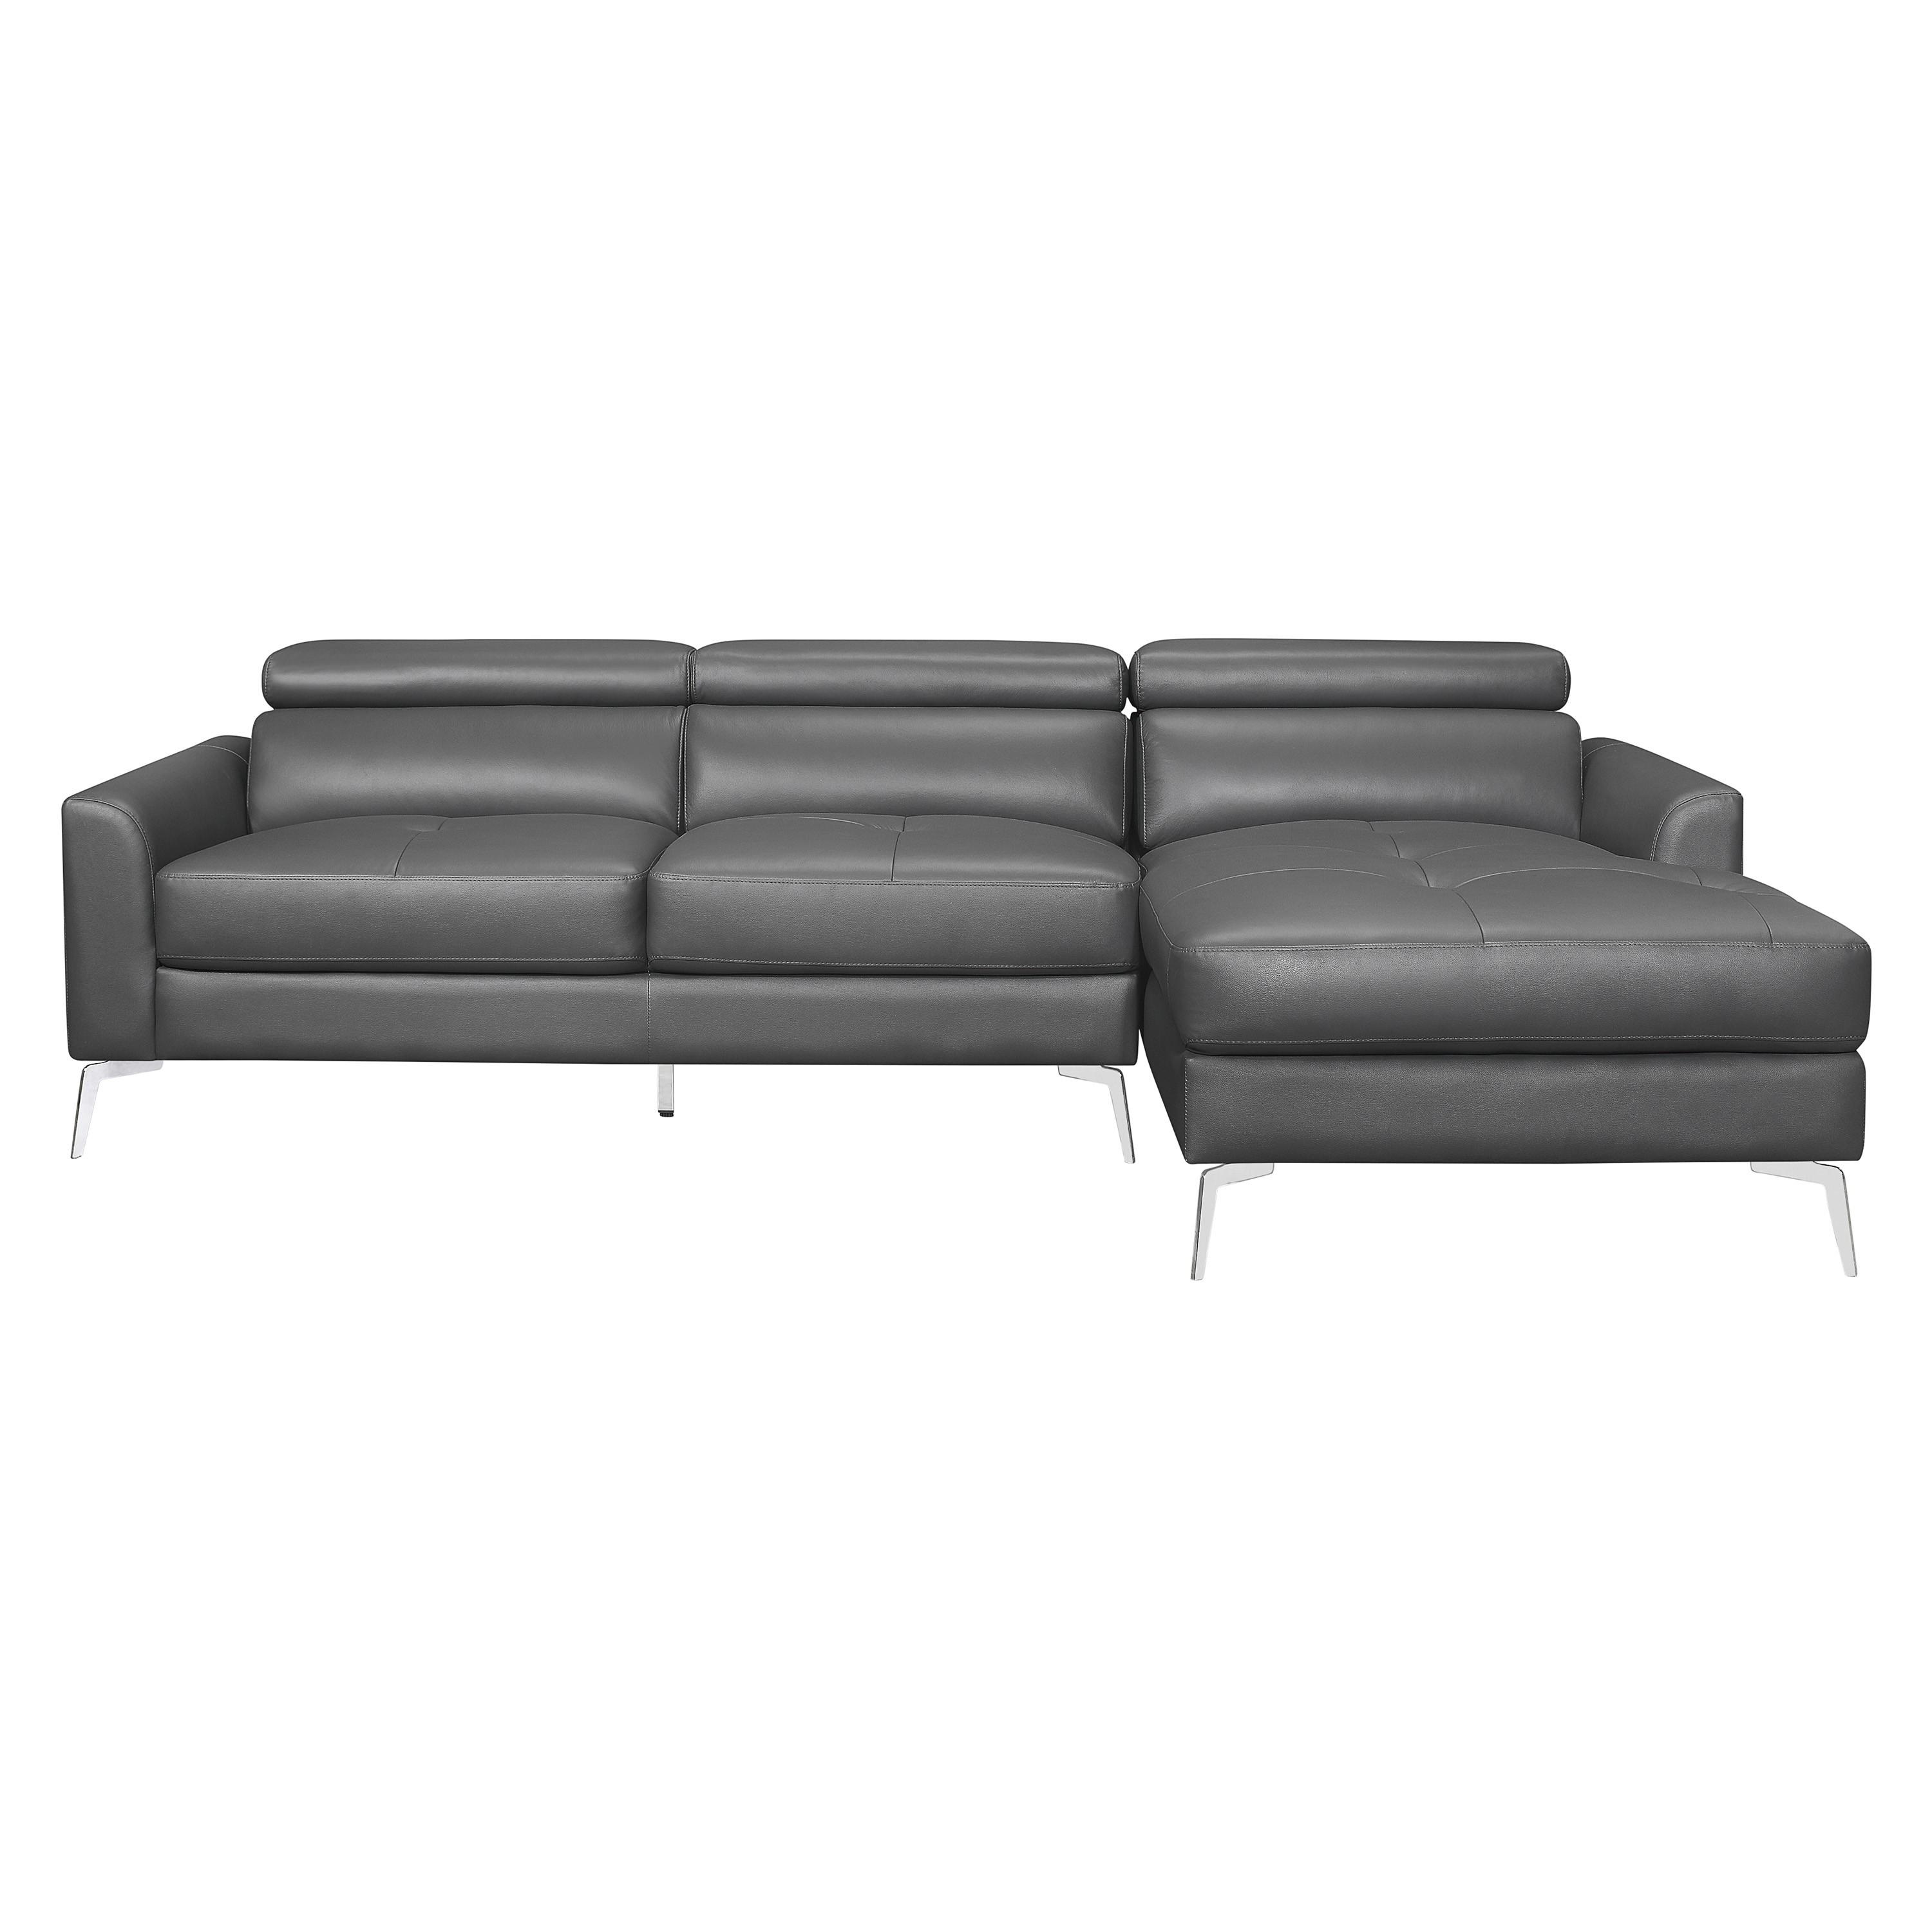 Contemporary Sectional 9408DGY*SC Ashland 9408DGY*SC in Dark Gray Leather